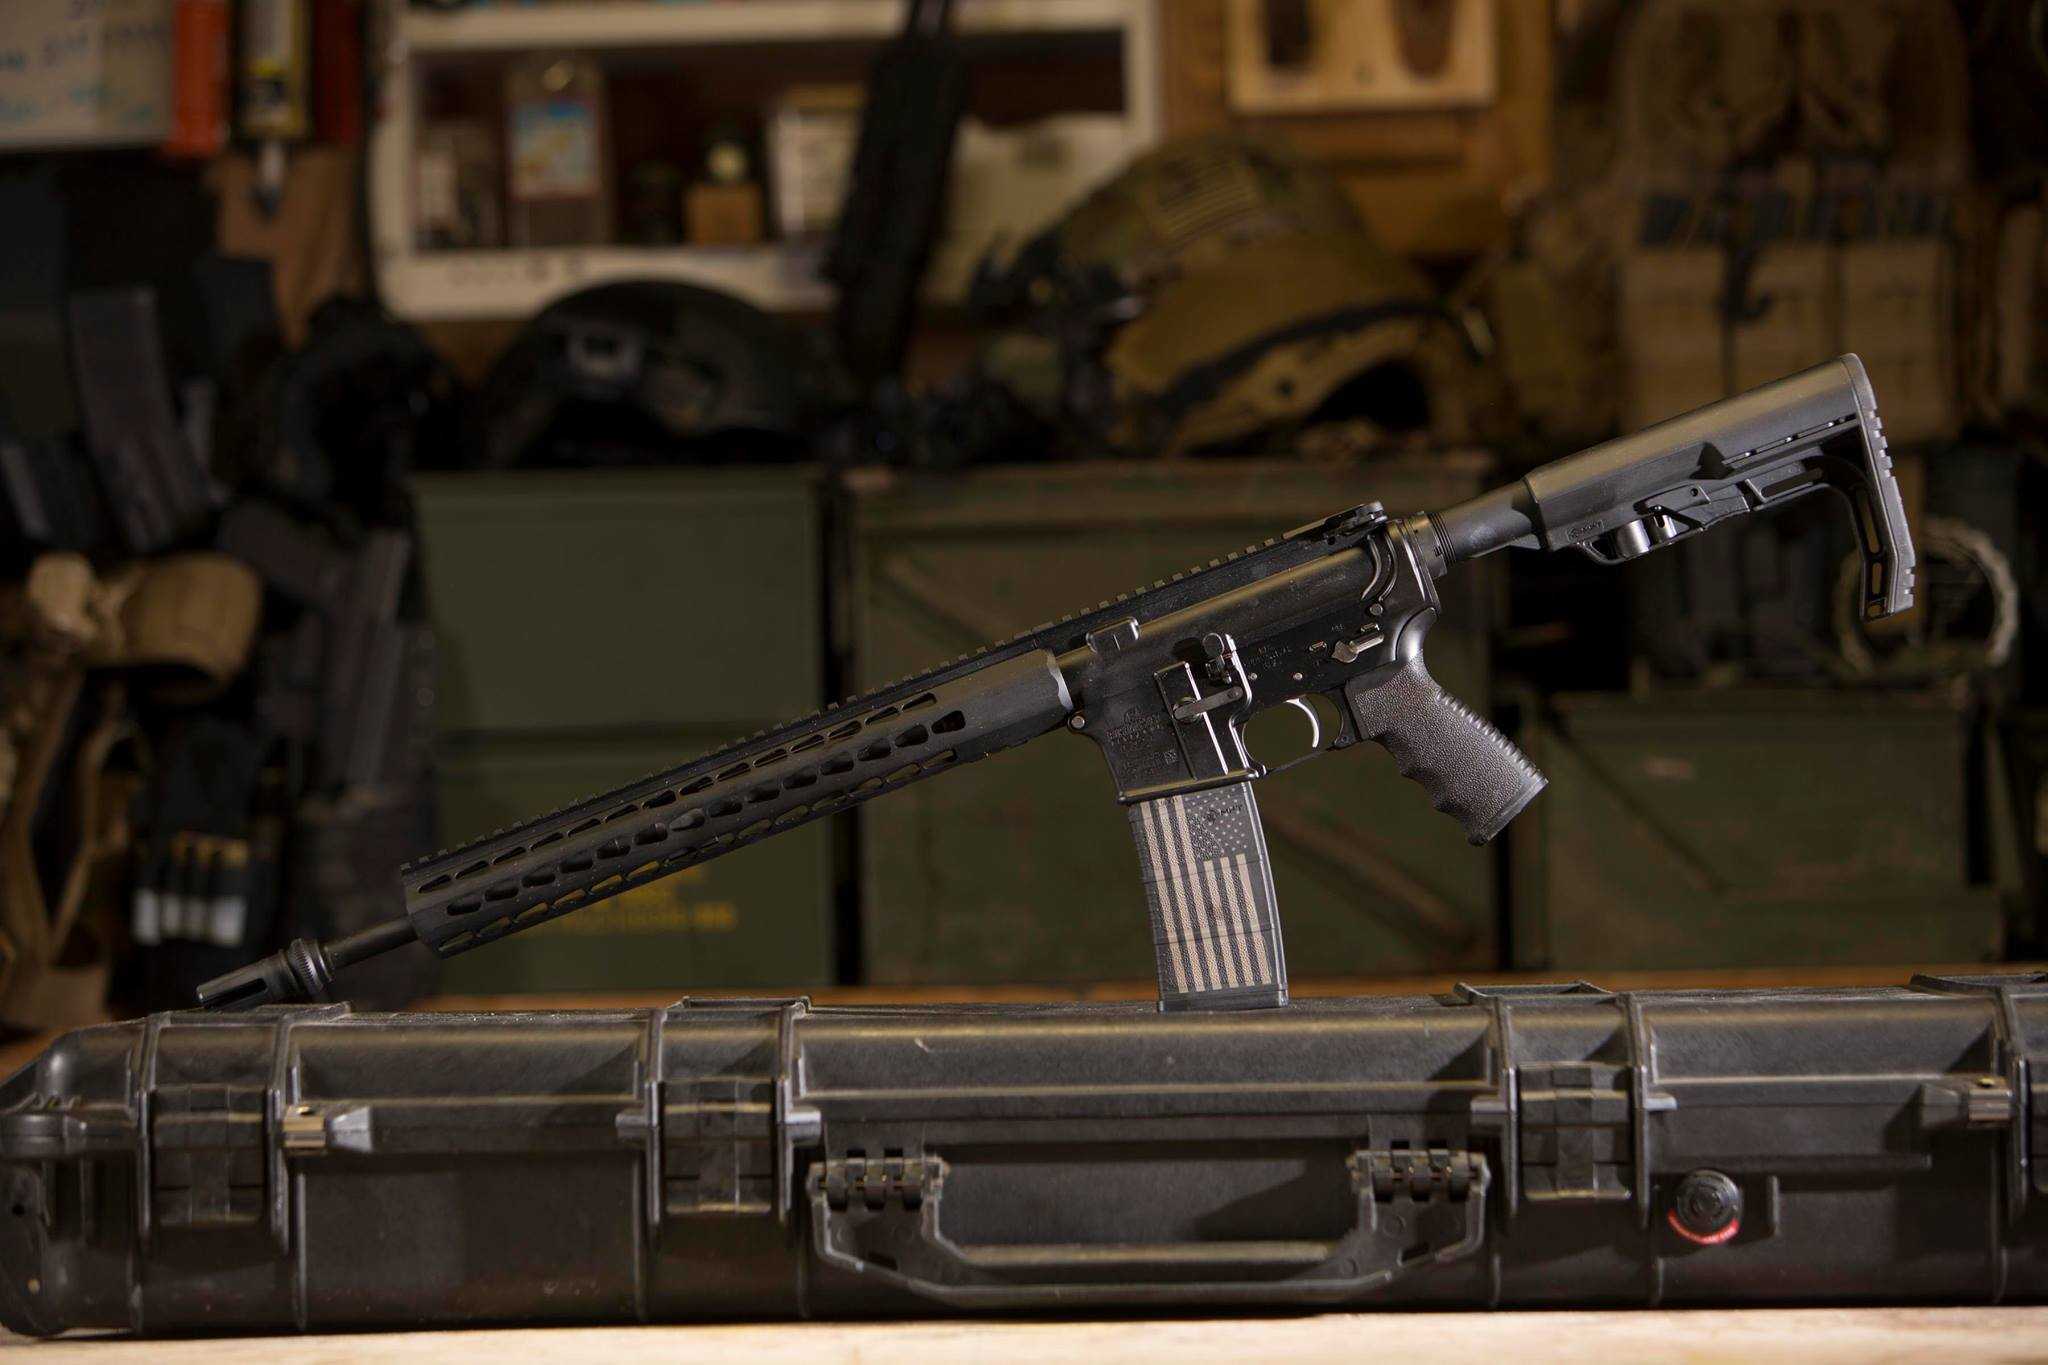 This popular battle rifle was actually designed to arm clerks and cooks